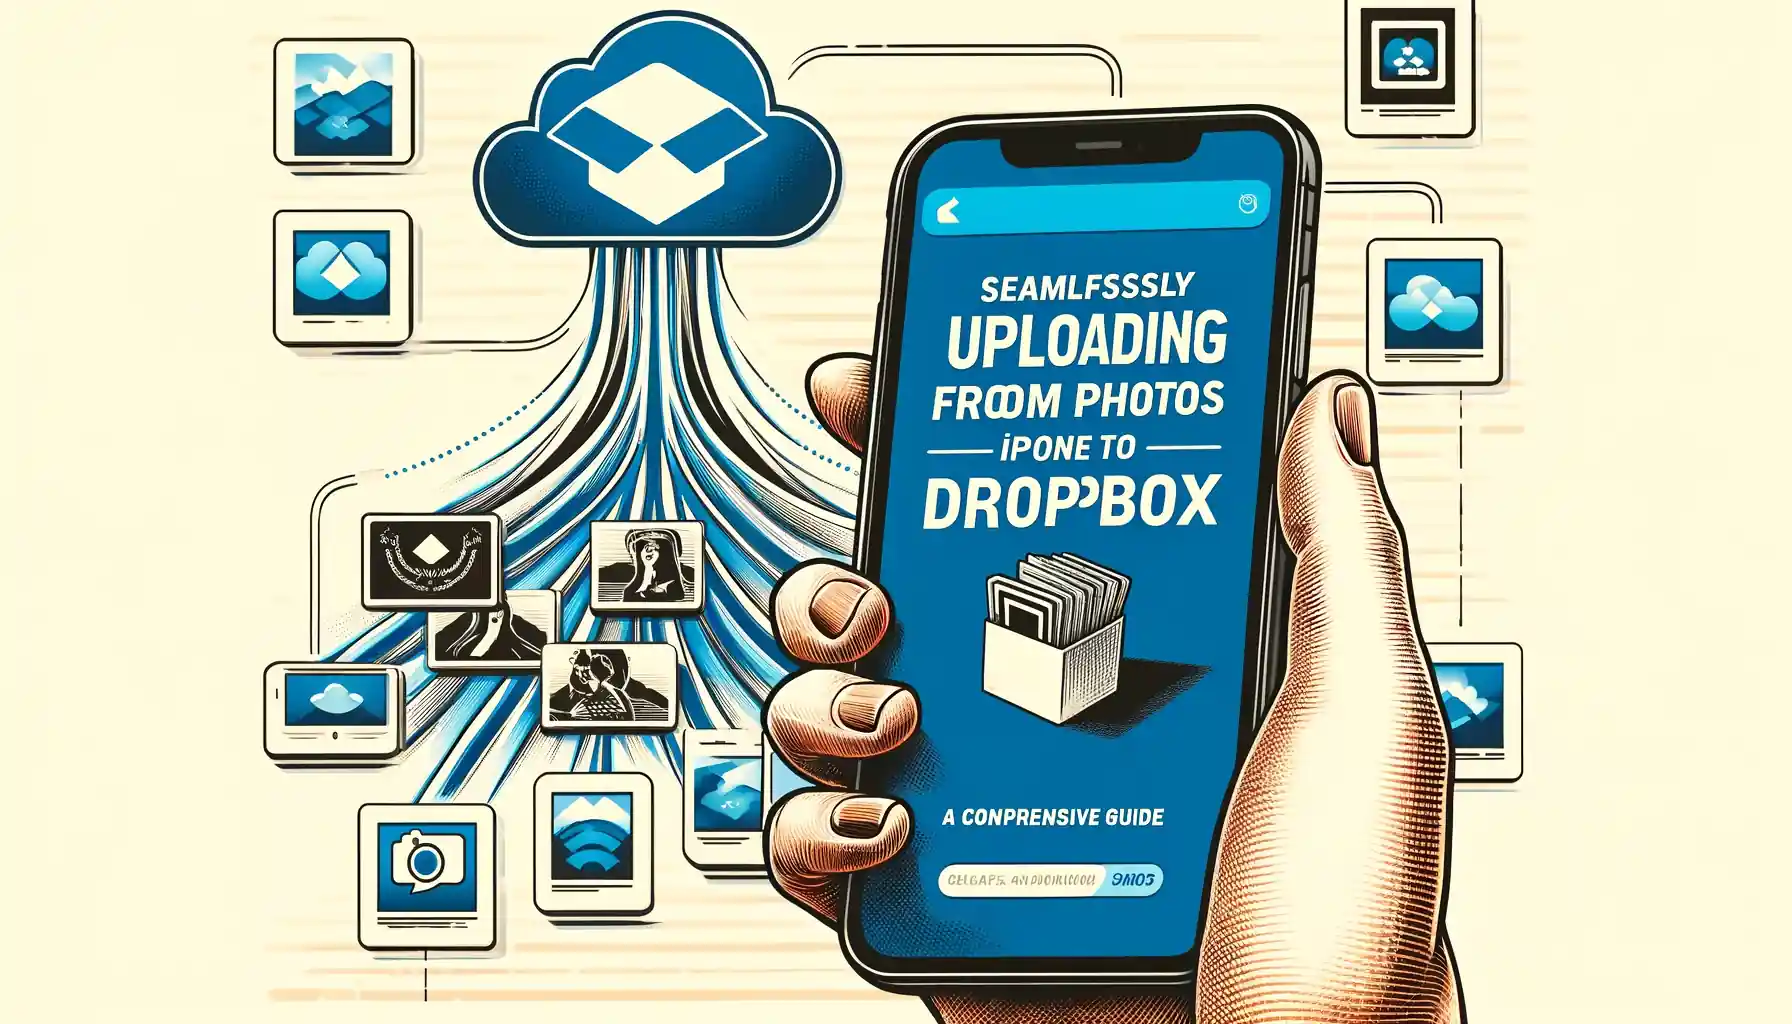 Uploading Photos from iPhone to Dropbox